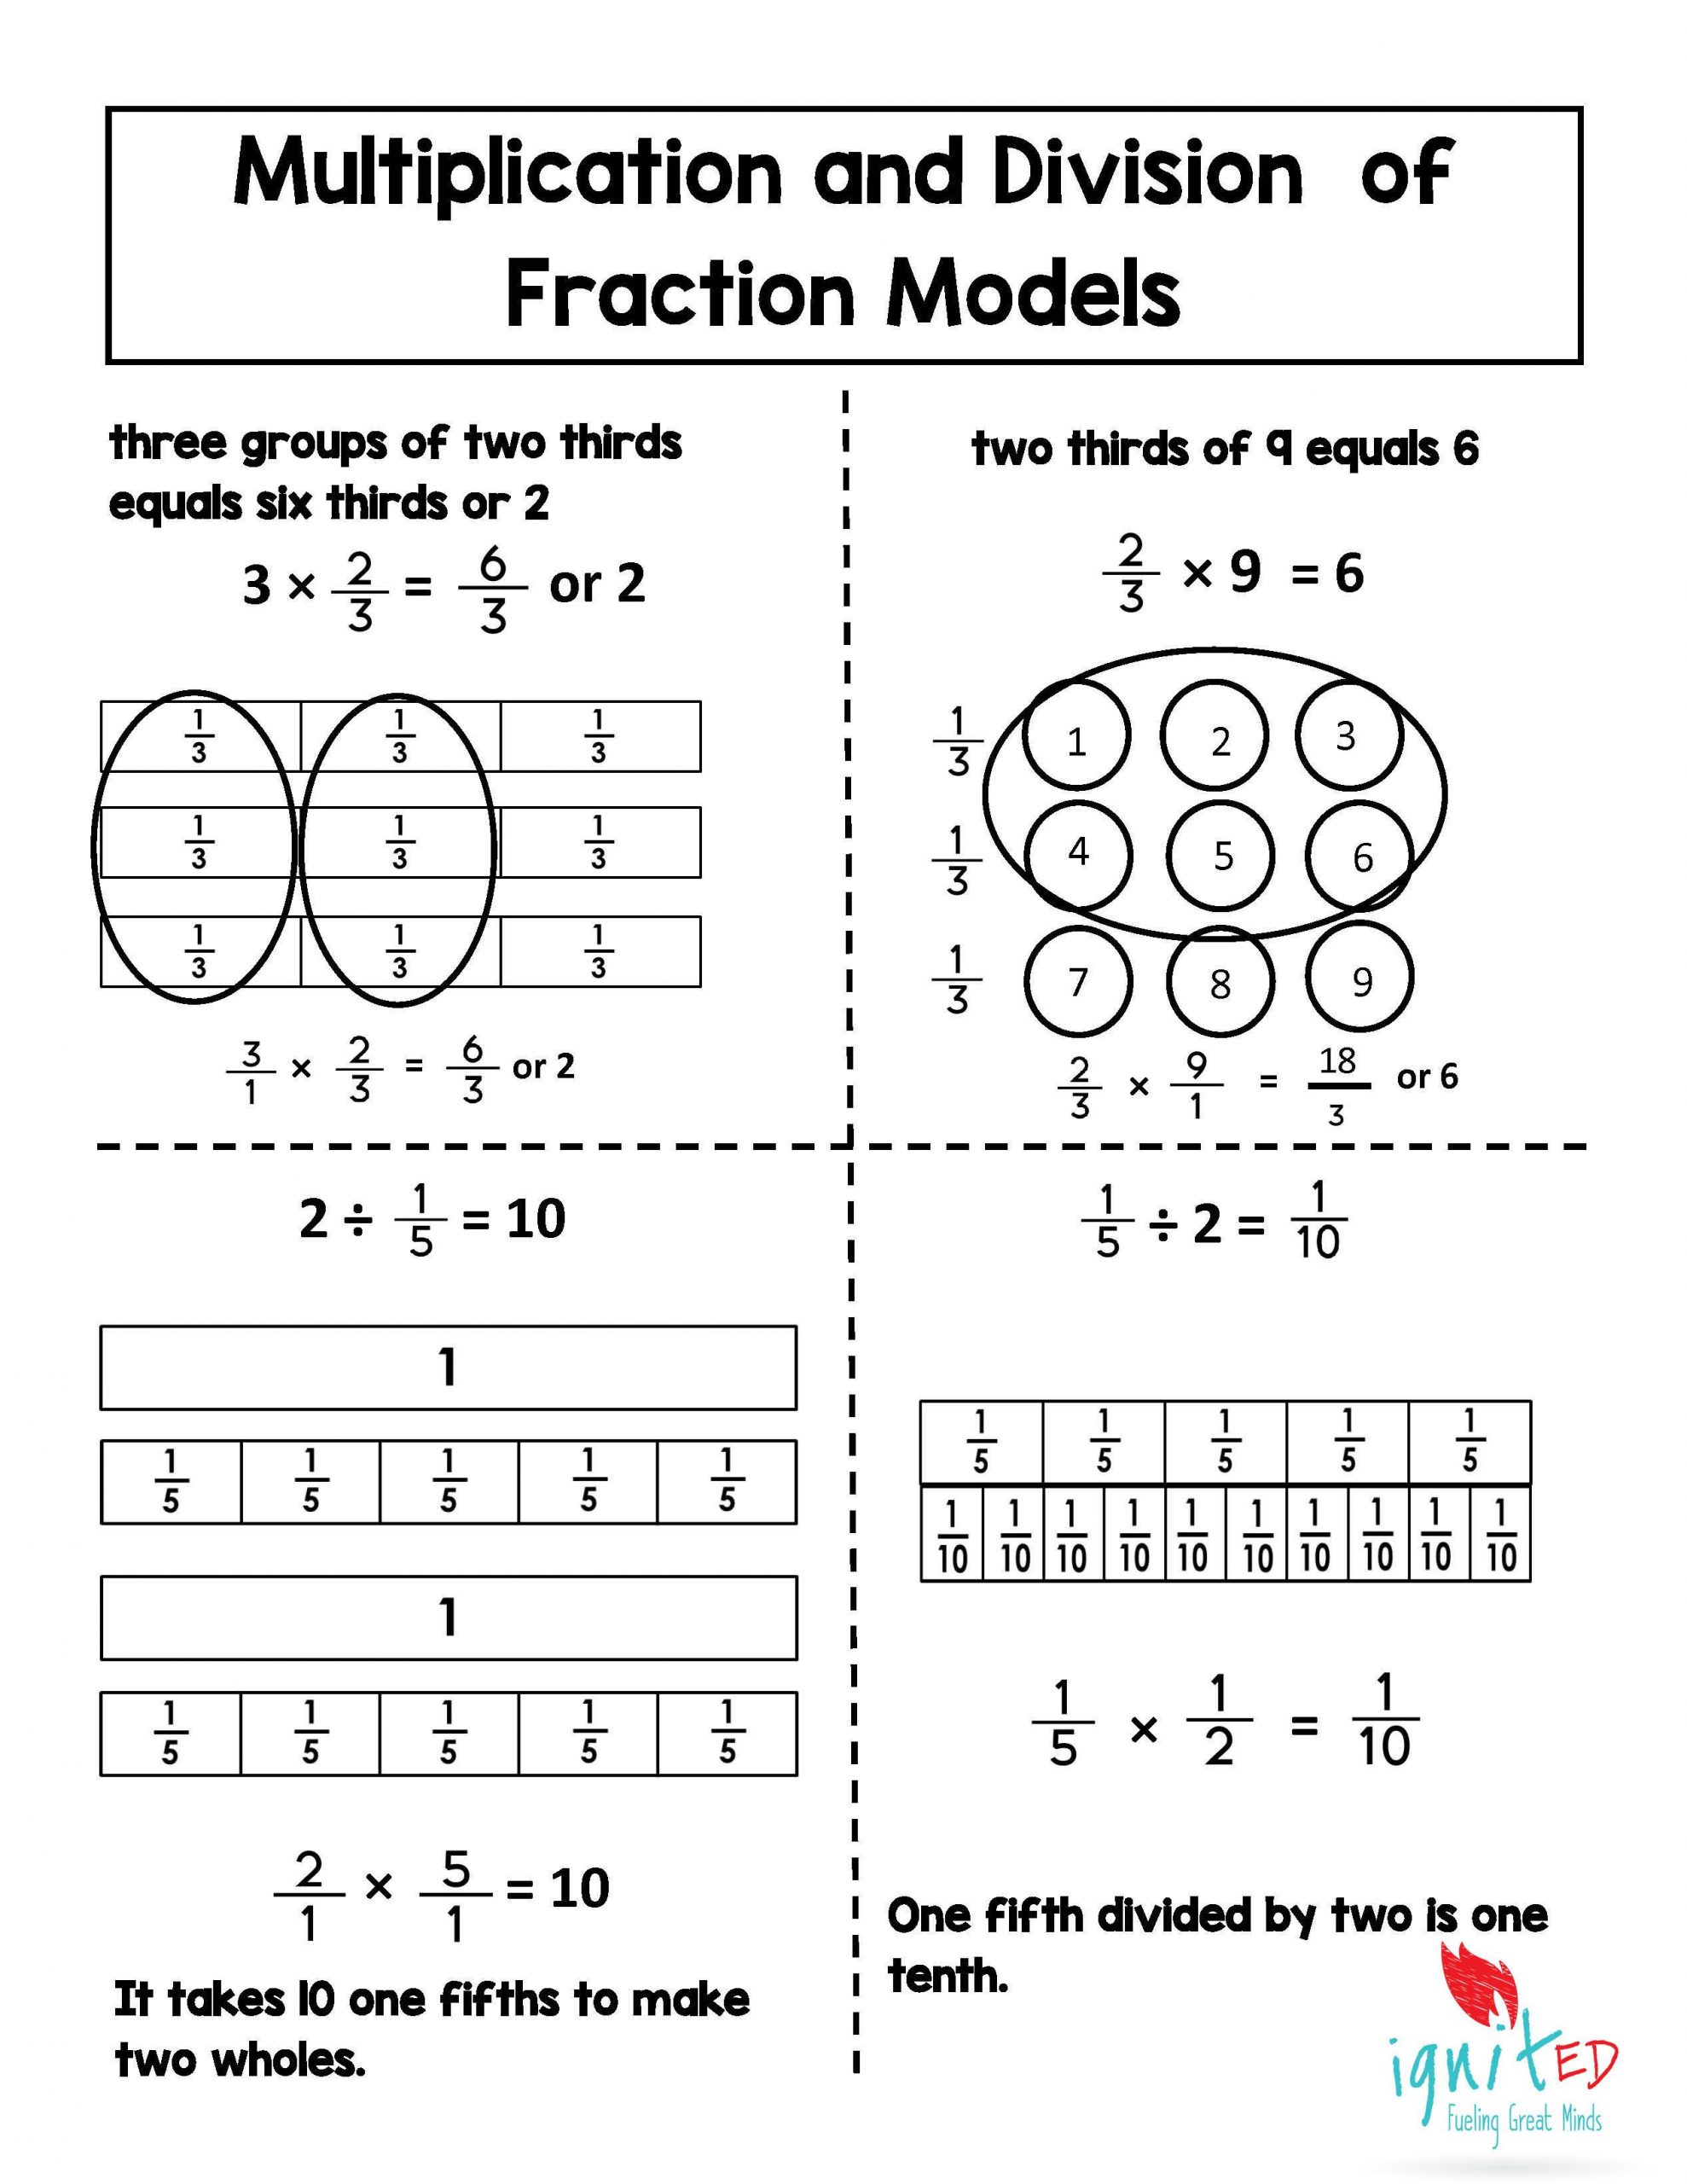 Dividing Fractions Using Models Worksheet Multiplication and Division Model Of Fractions and whole